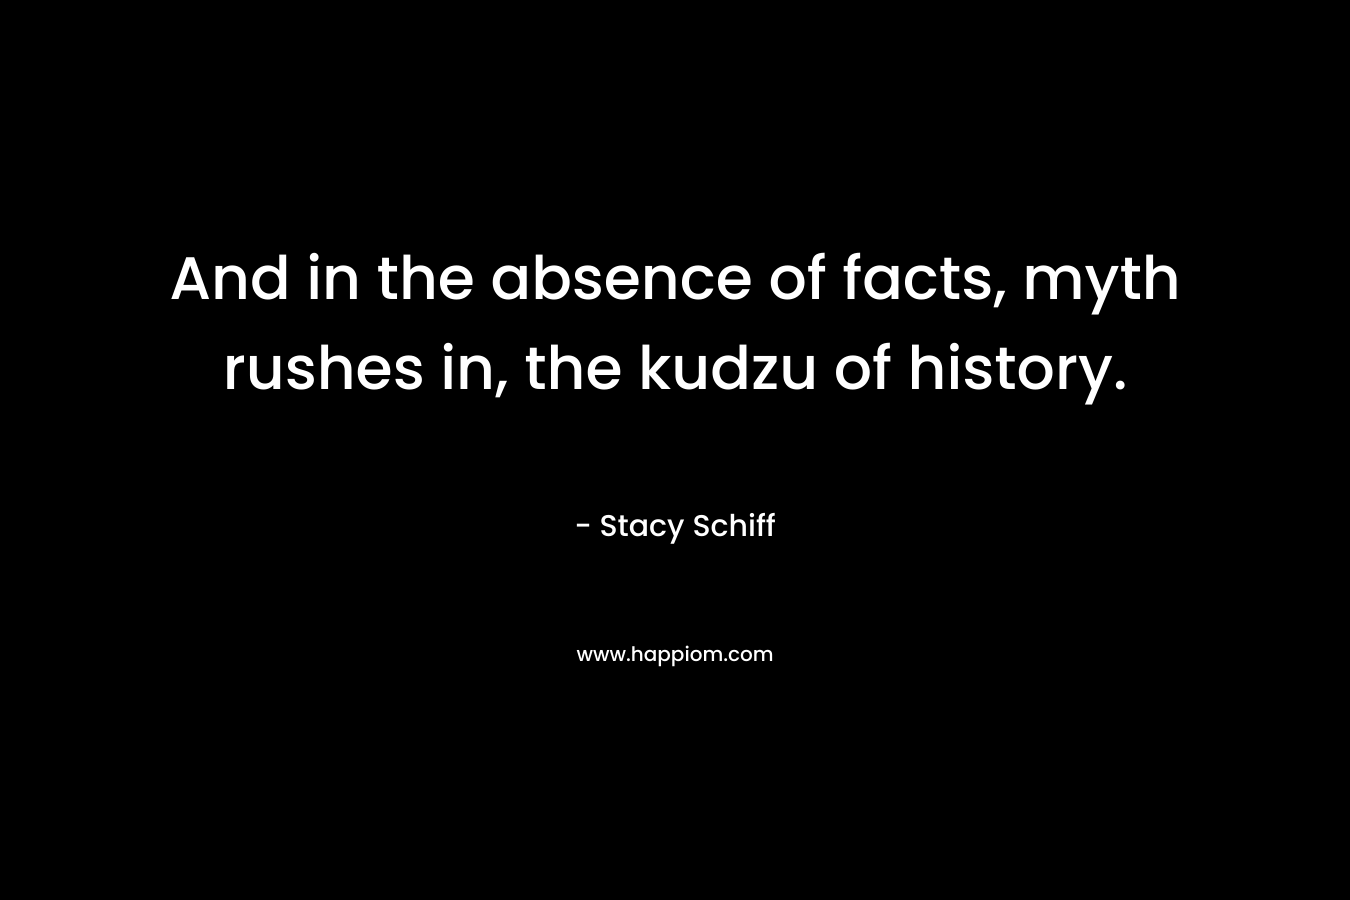 And in the absence of facts, myth rushes in, the kudzu of history.